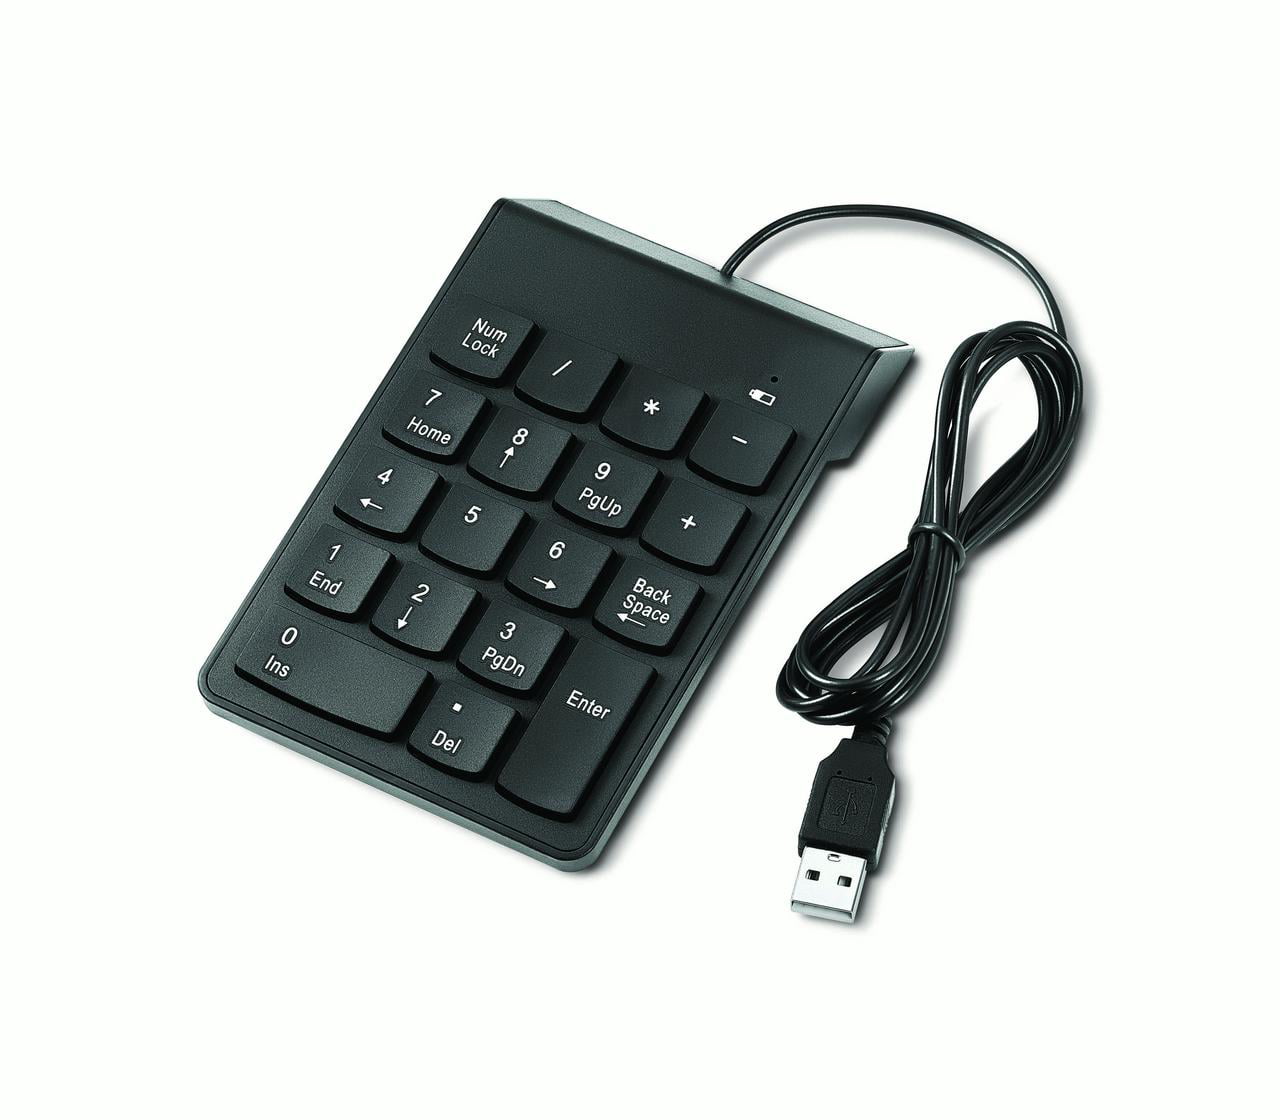 USB Number Keyboard USB Numeric Keypad 18 Keys Ultra-Thin Portable USB Numeric Keypad Keyboard for Laptop Desktop PC Notebook with USB Cable CHIYOU Number Pad 